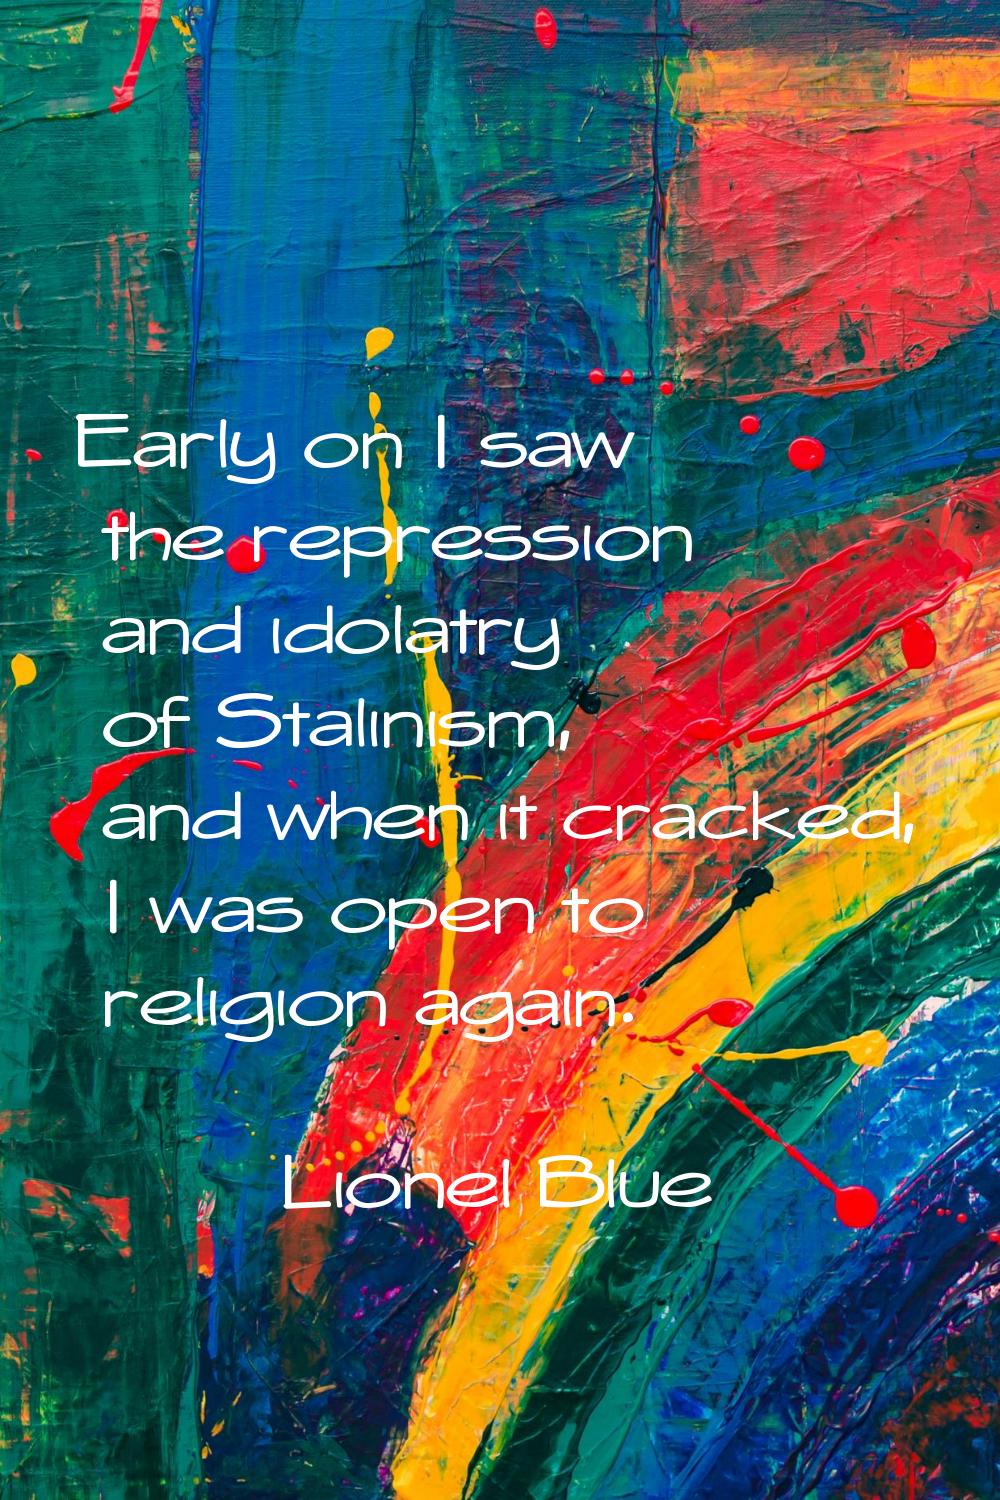 Early on I saw the repression and idolatry of Stalinism, and when it cracked, I was open to religio